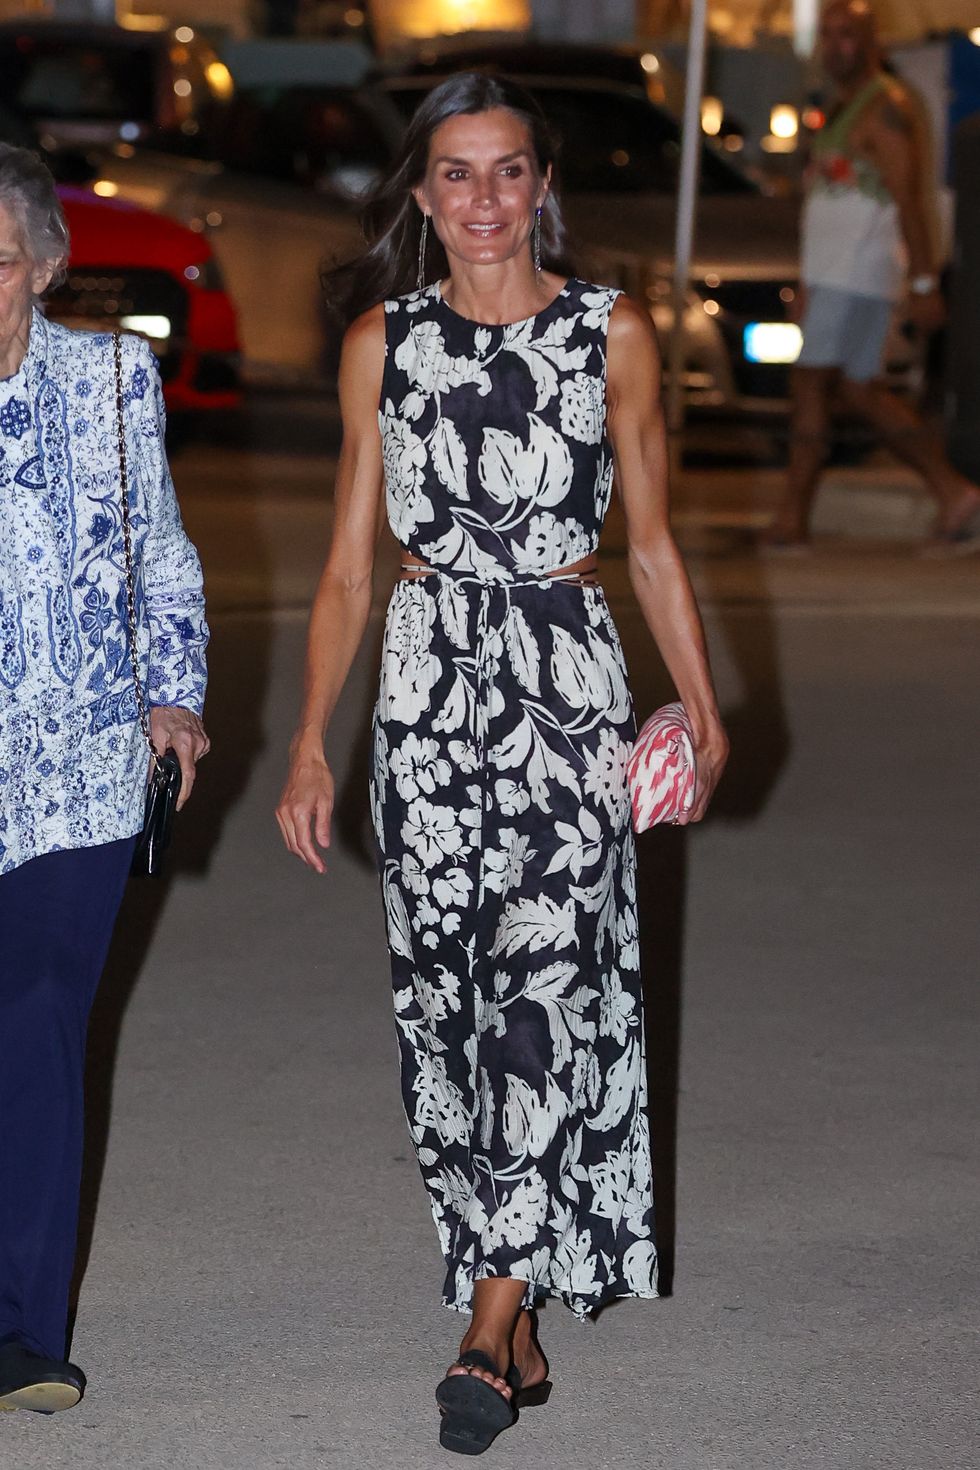 mallorca, spain   august 05 queen letizia and irene of greece go out to dinner in mallorca on august 06, 2022 in mallorca, spain photo by raul terreleuropa press via getty images